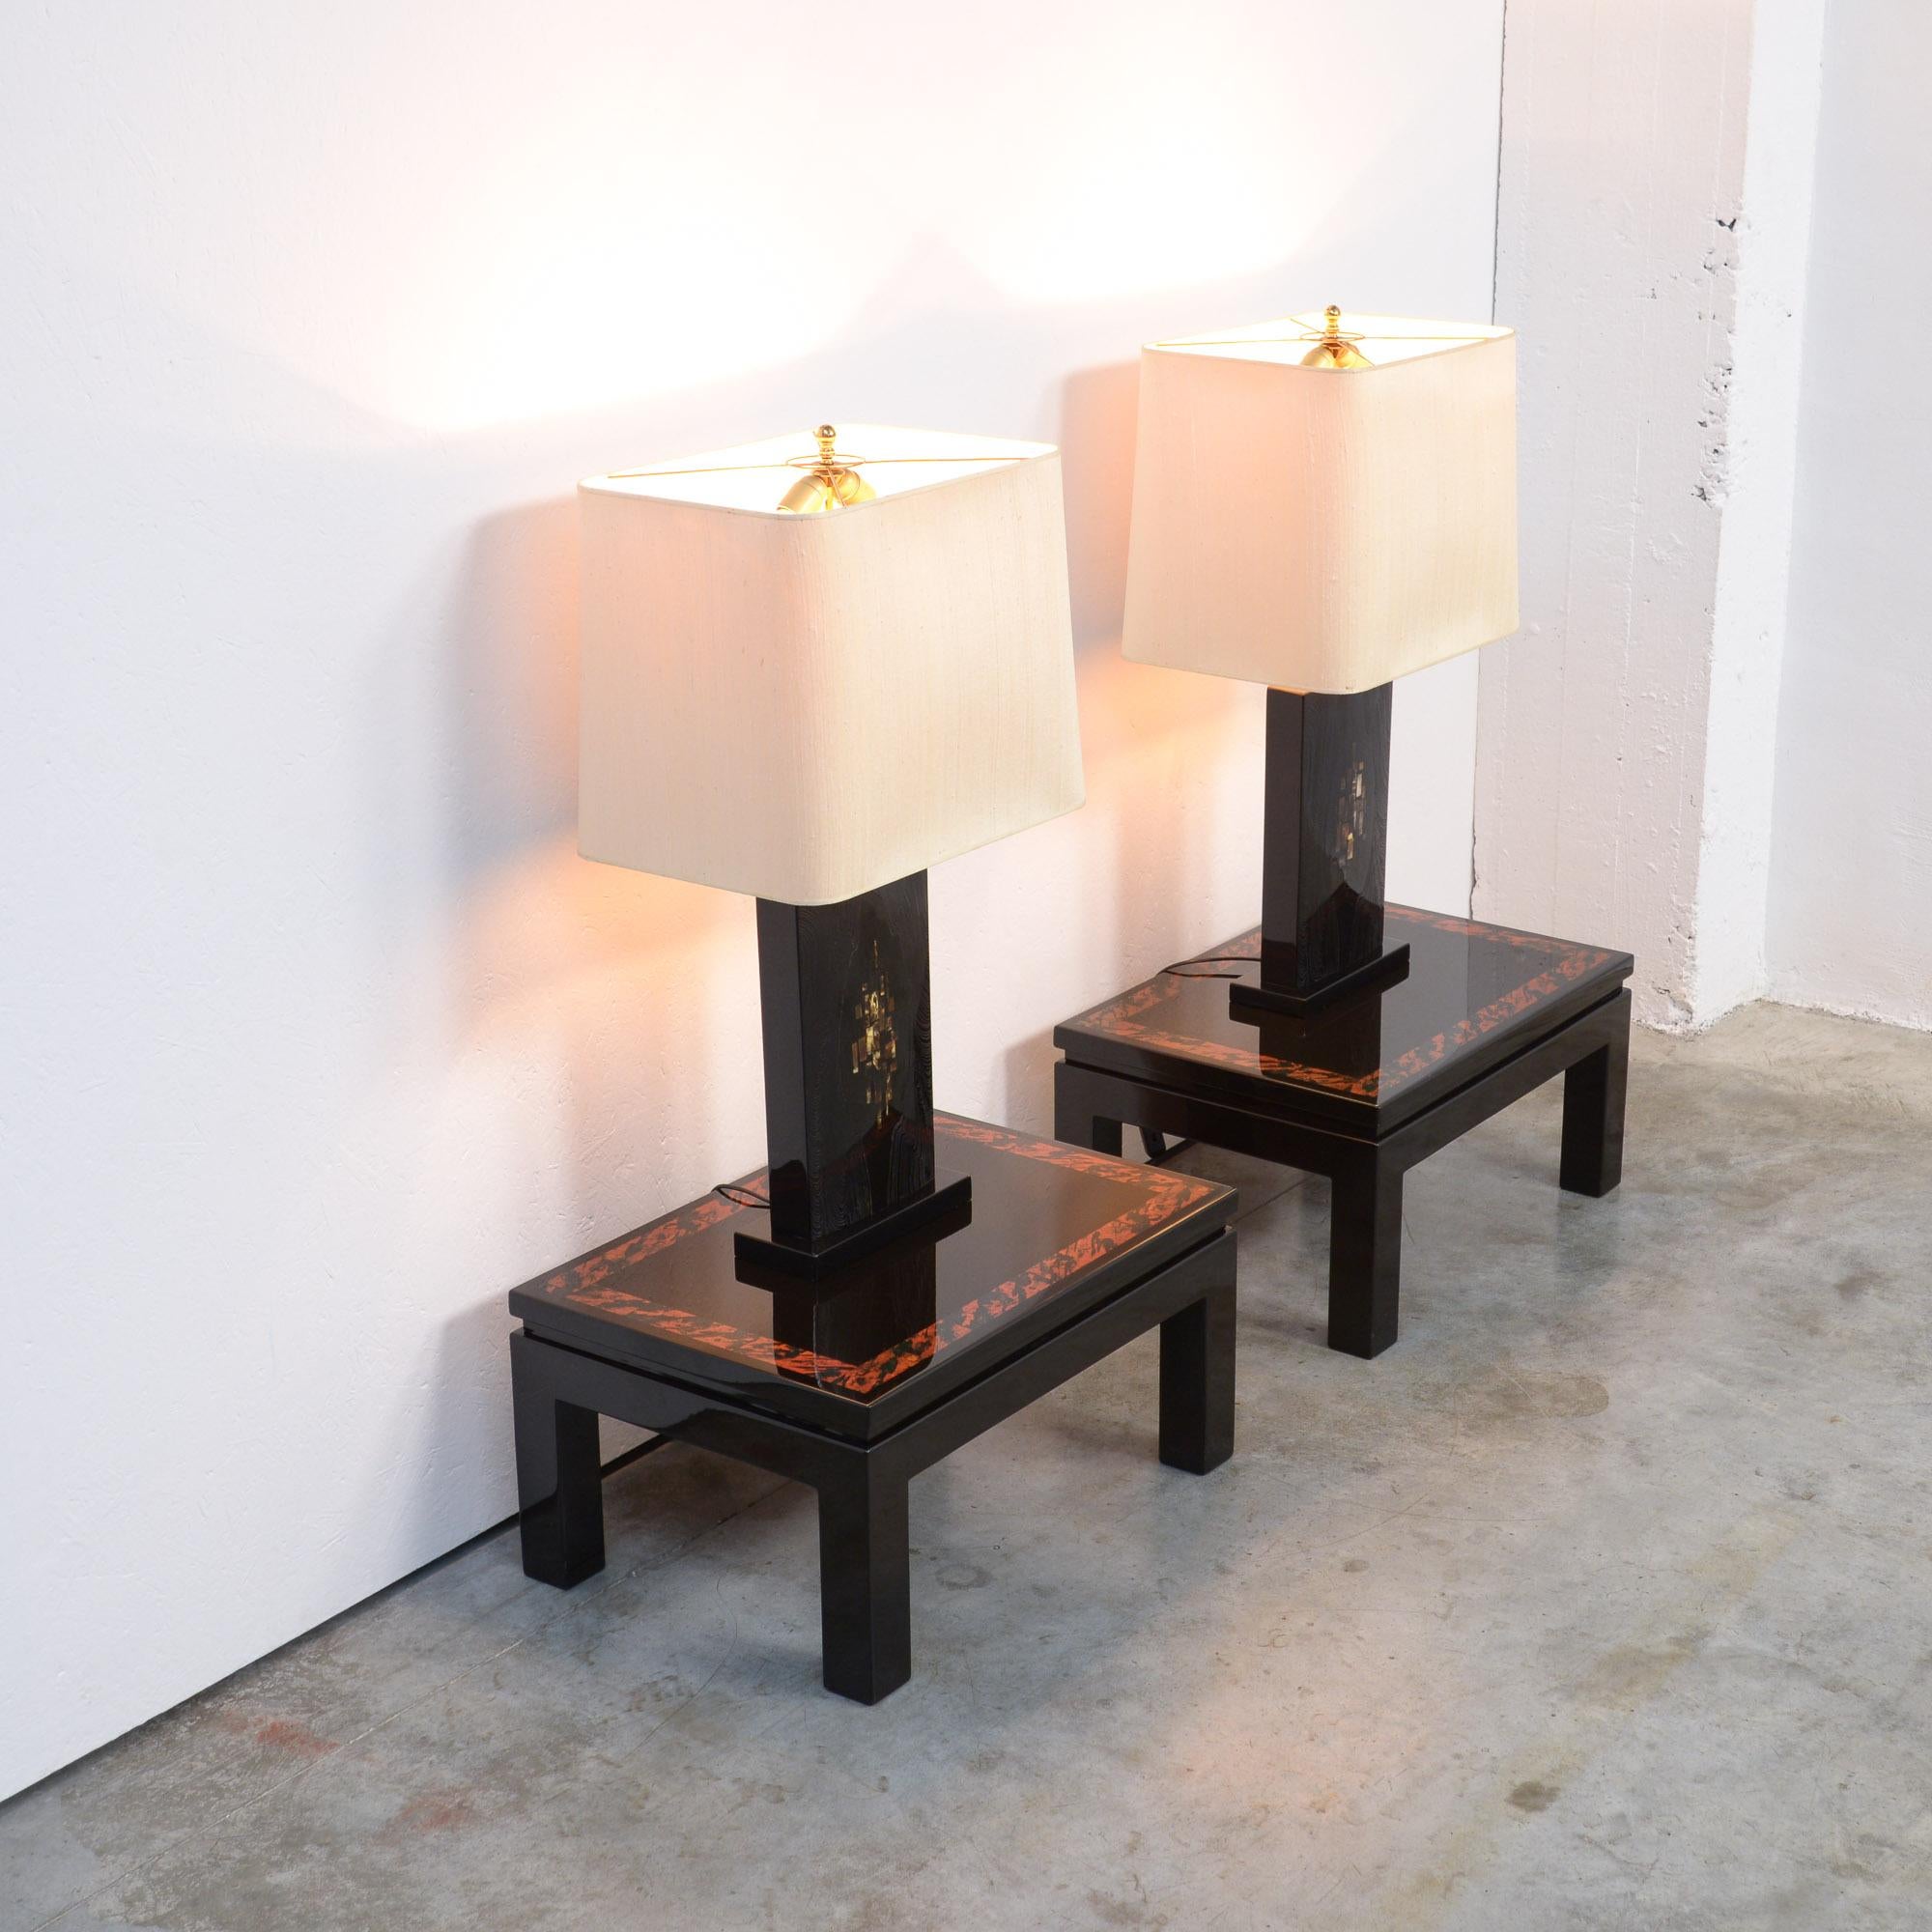 Stylish Pair of Side Tables by Jean Claude Dresse (Moderne)